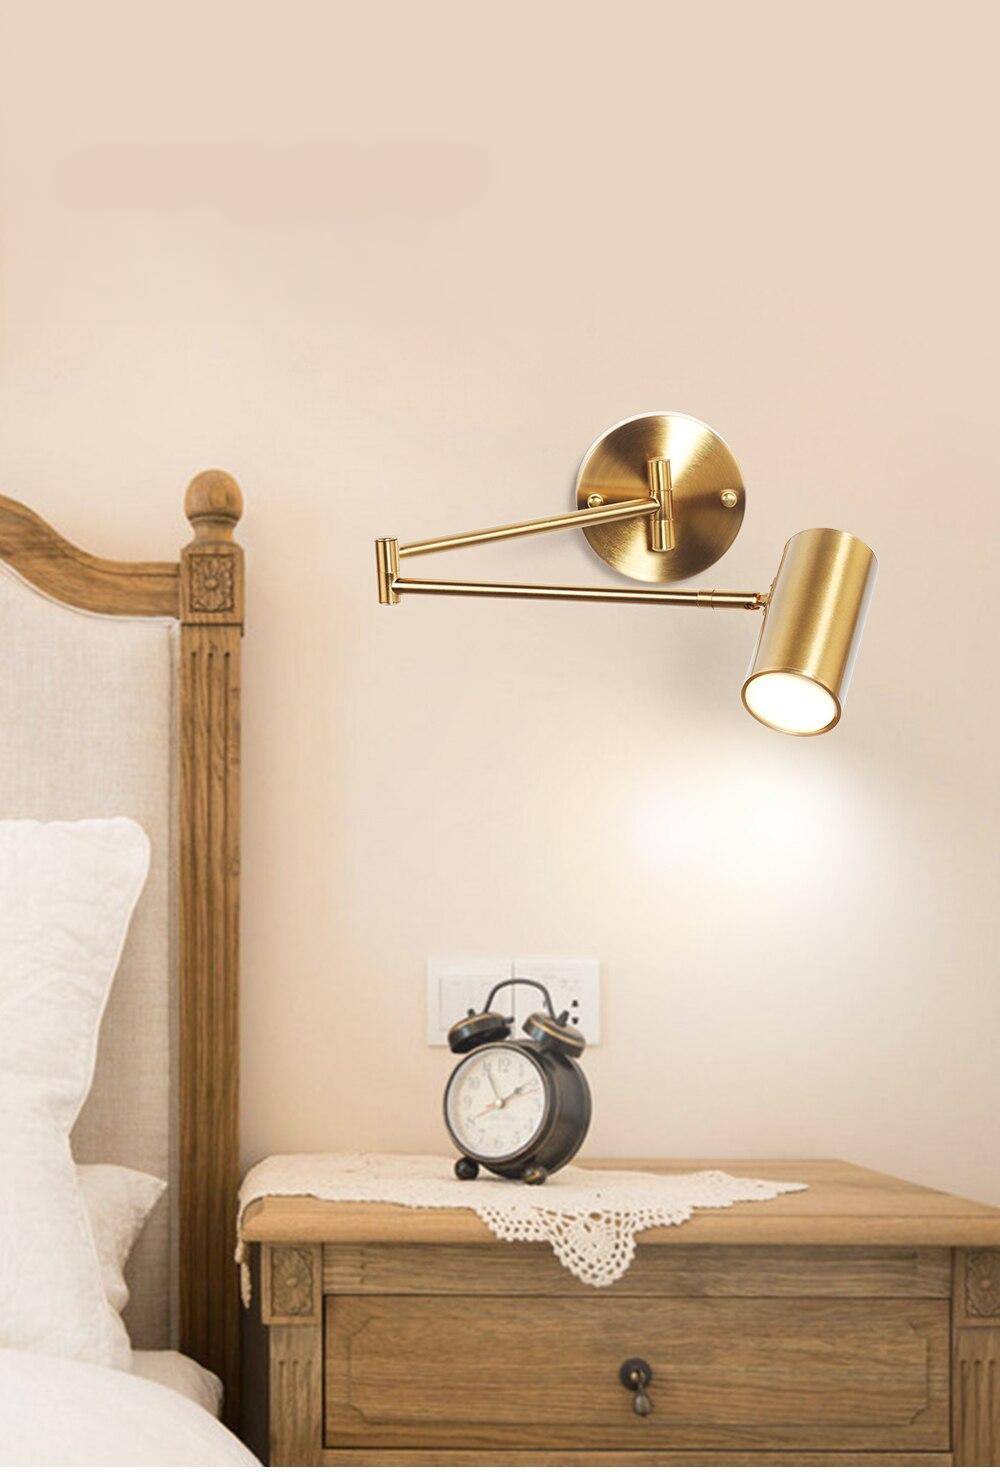 LUCKYLED Led Wall Light Fixture Nordic Adjustable Swing Long Arm Golden Wall Lamp Bedroom Bedside Sconce ( Free Bulb as Gift)